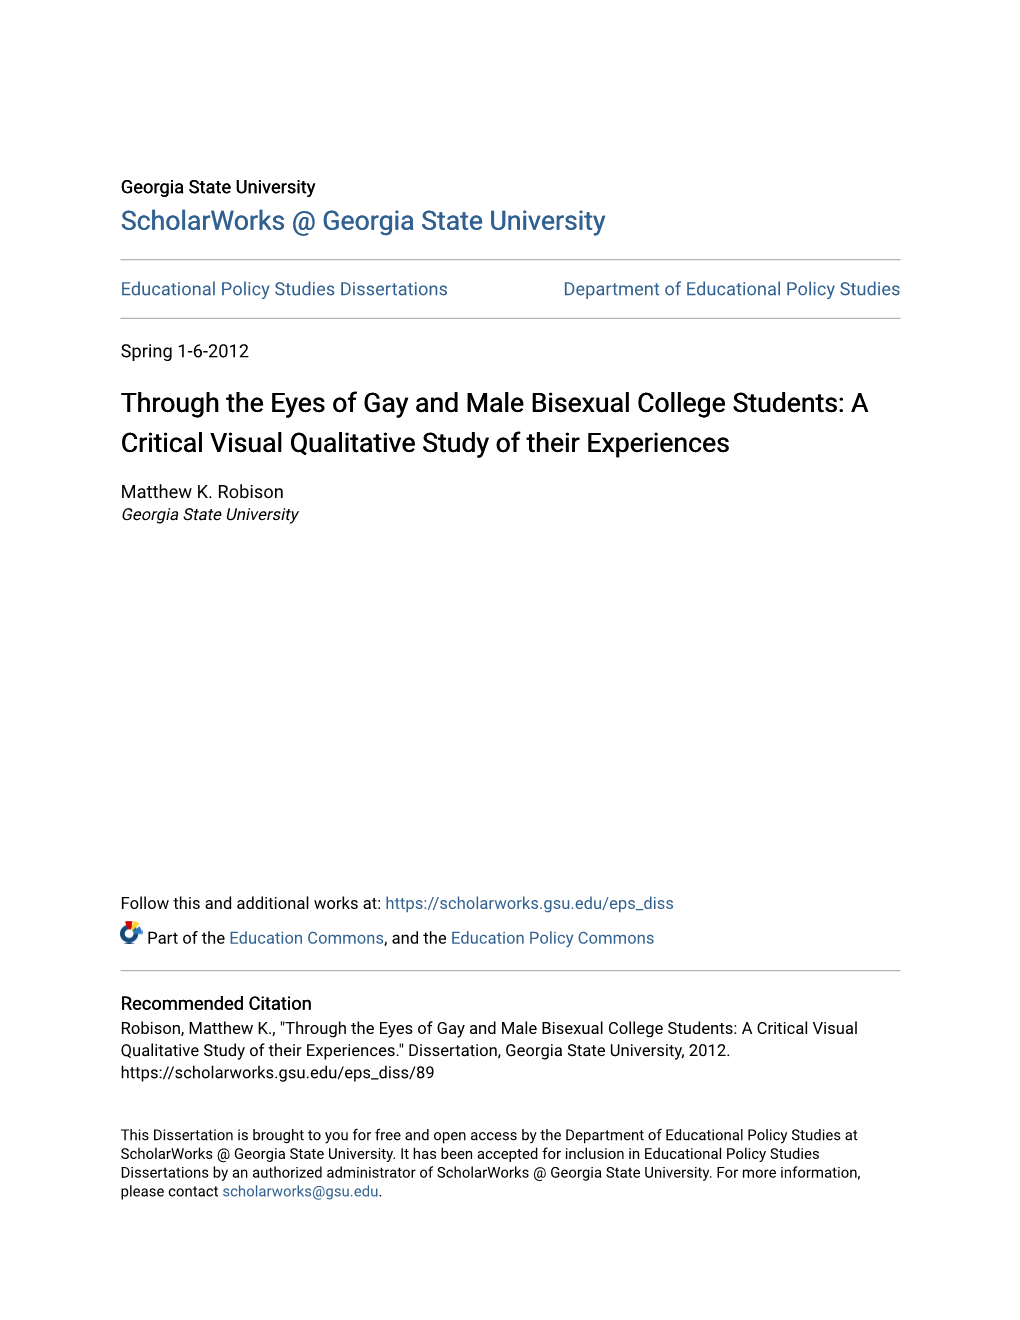 Through the Eyes of Gay and Male Bisexual College Students: a Critical Visual Qualitative Study of Their Experiences